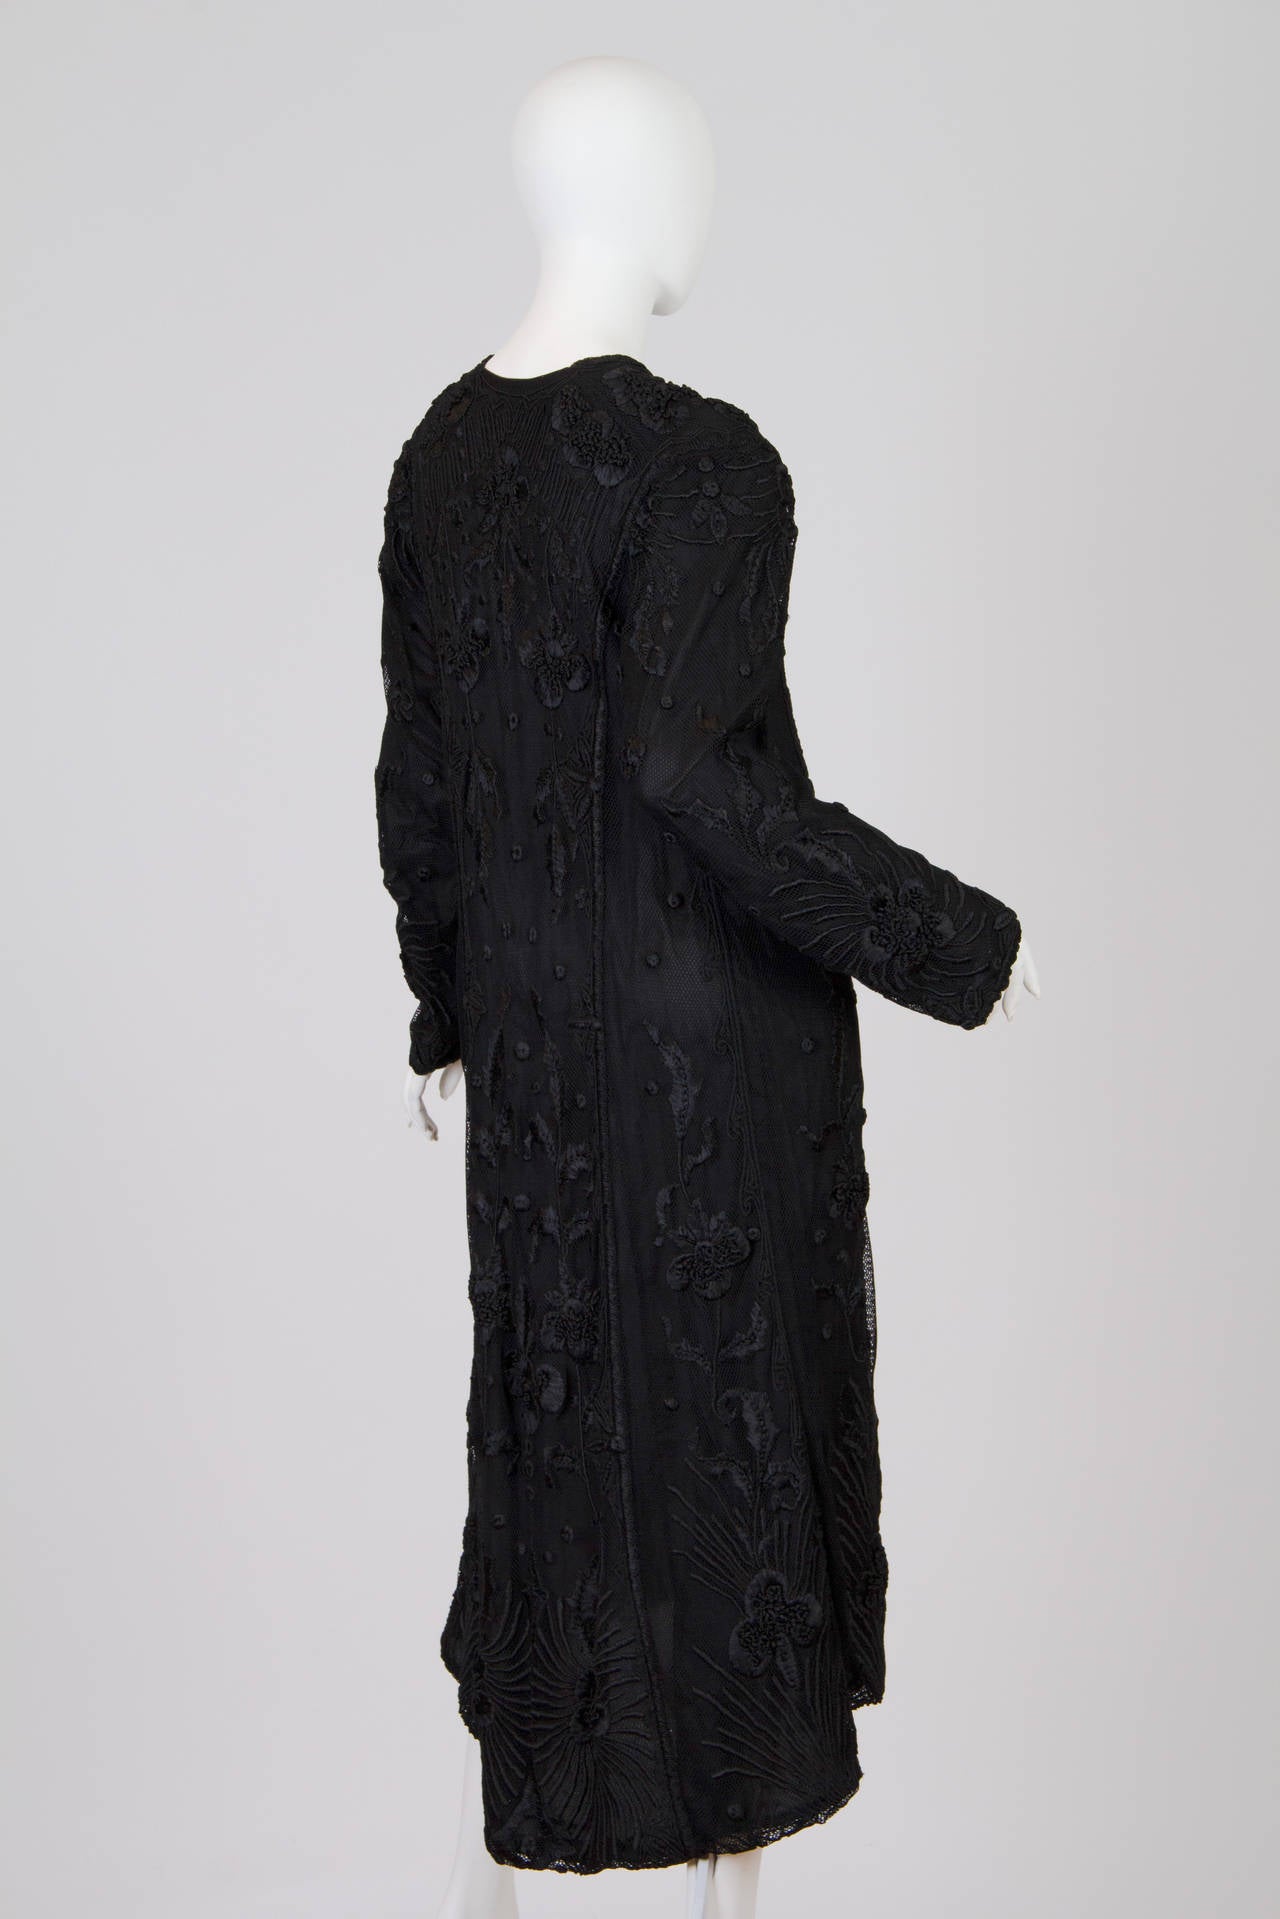 Edwardian Black Hand Embroidered Silk Net Long Duster In Excellent Condition For Sale In New York, NY